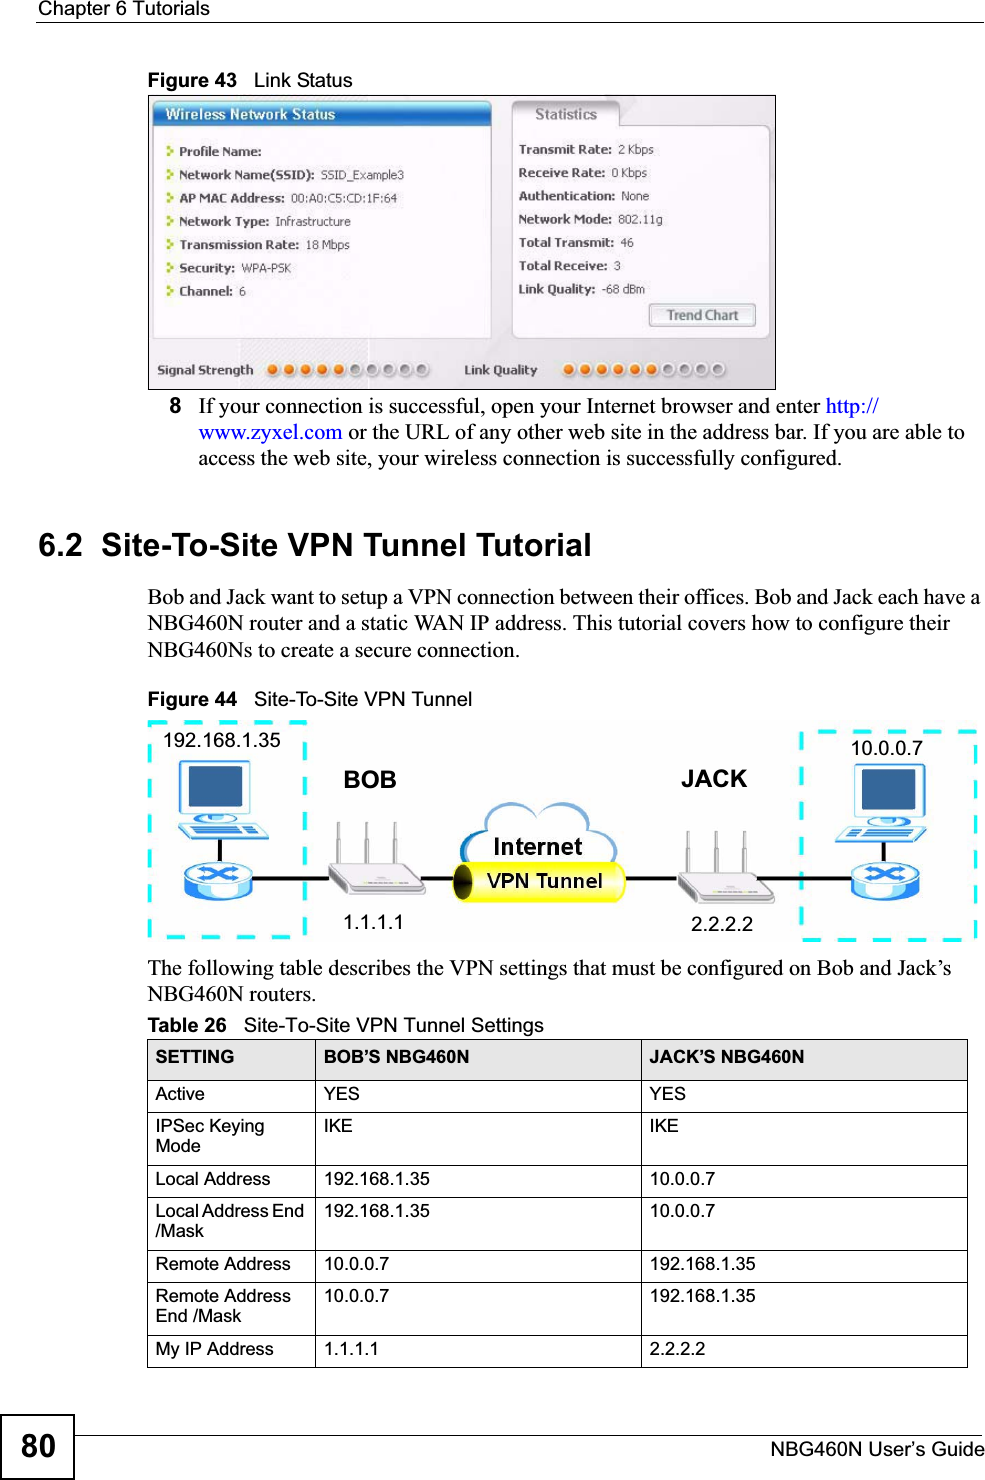 Chapter 6 TutorialsNBG460N User’s Guide80Figure 43   Link Status 8If your connection is successful, open your Internet browser and enter http://www.zyxel.com or the URL of any other web site in the address bar. If you are able to access the web site, your wireless connection is successfully configured.6.2  Site-To-Site VPN Tunnel TutorialBob and Jack want to setup a VPN connection between their offices. Bob and Jack each have a NBG460N router and a static WAN IP address. This tutorial covers how to configure their NBG460Ns to create a secure connection.Figure 44   Site-To-Site VPN TunnelThe following table describes the VPN settings that must be configured on Bob and Jack’s NBG460N routers.Table 26   Site-To-Site VPN Tunnel Settings SETTING BOB’S NBG460N JACK’S NBG460NActive YES YESIPSec Keying ModeIKE IKELocal Address 192.168.1.35 10.0.0.7Local Address End /Mask192.168.1.35 10.0.0.7Remote Address 10.0.0.7 192.168.1.35Remote Address End /Mask10.0.0.7 192.168.1.35My IP Address  1.1.1.1 2.2.2.2192.168.1.35 10.0.0.7BOB JACK1.1.1.1 2.2.2.2